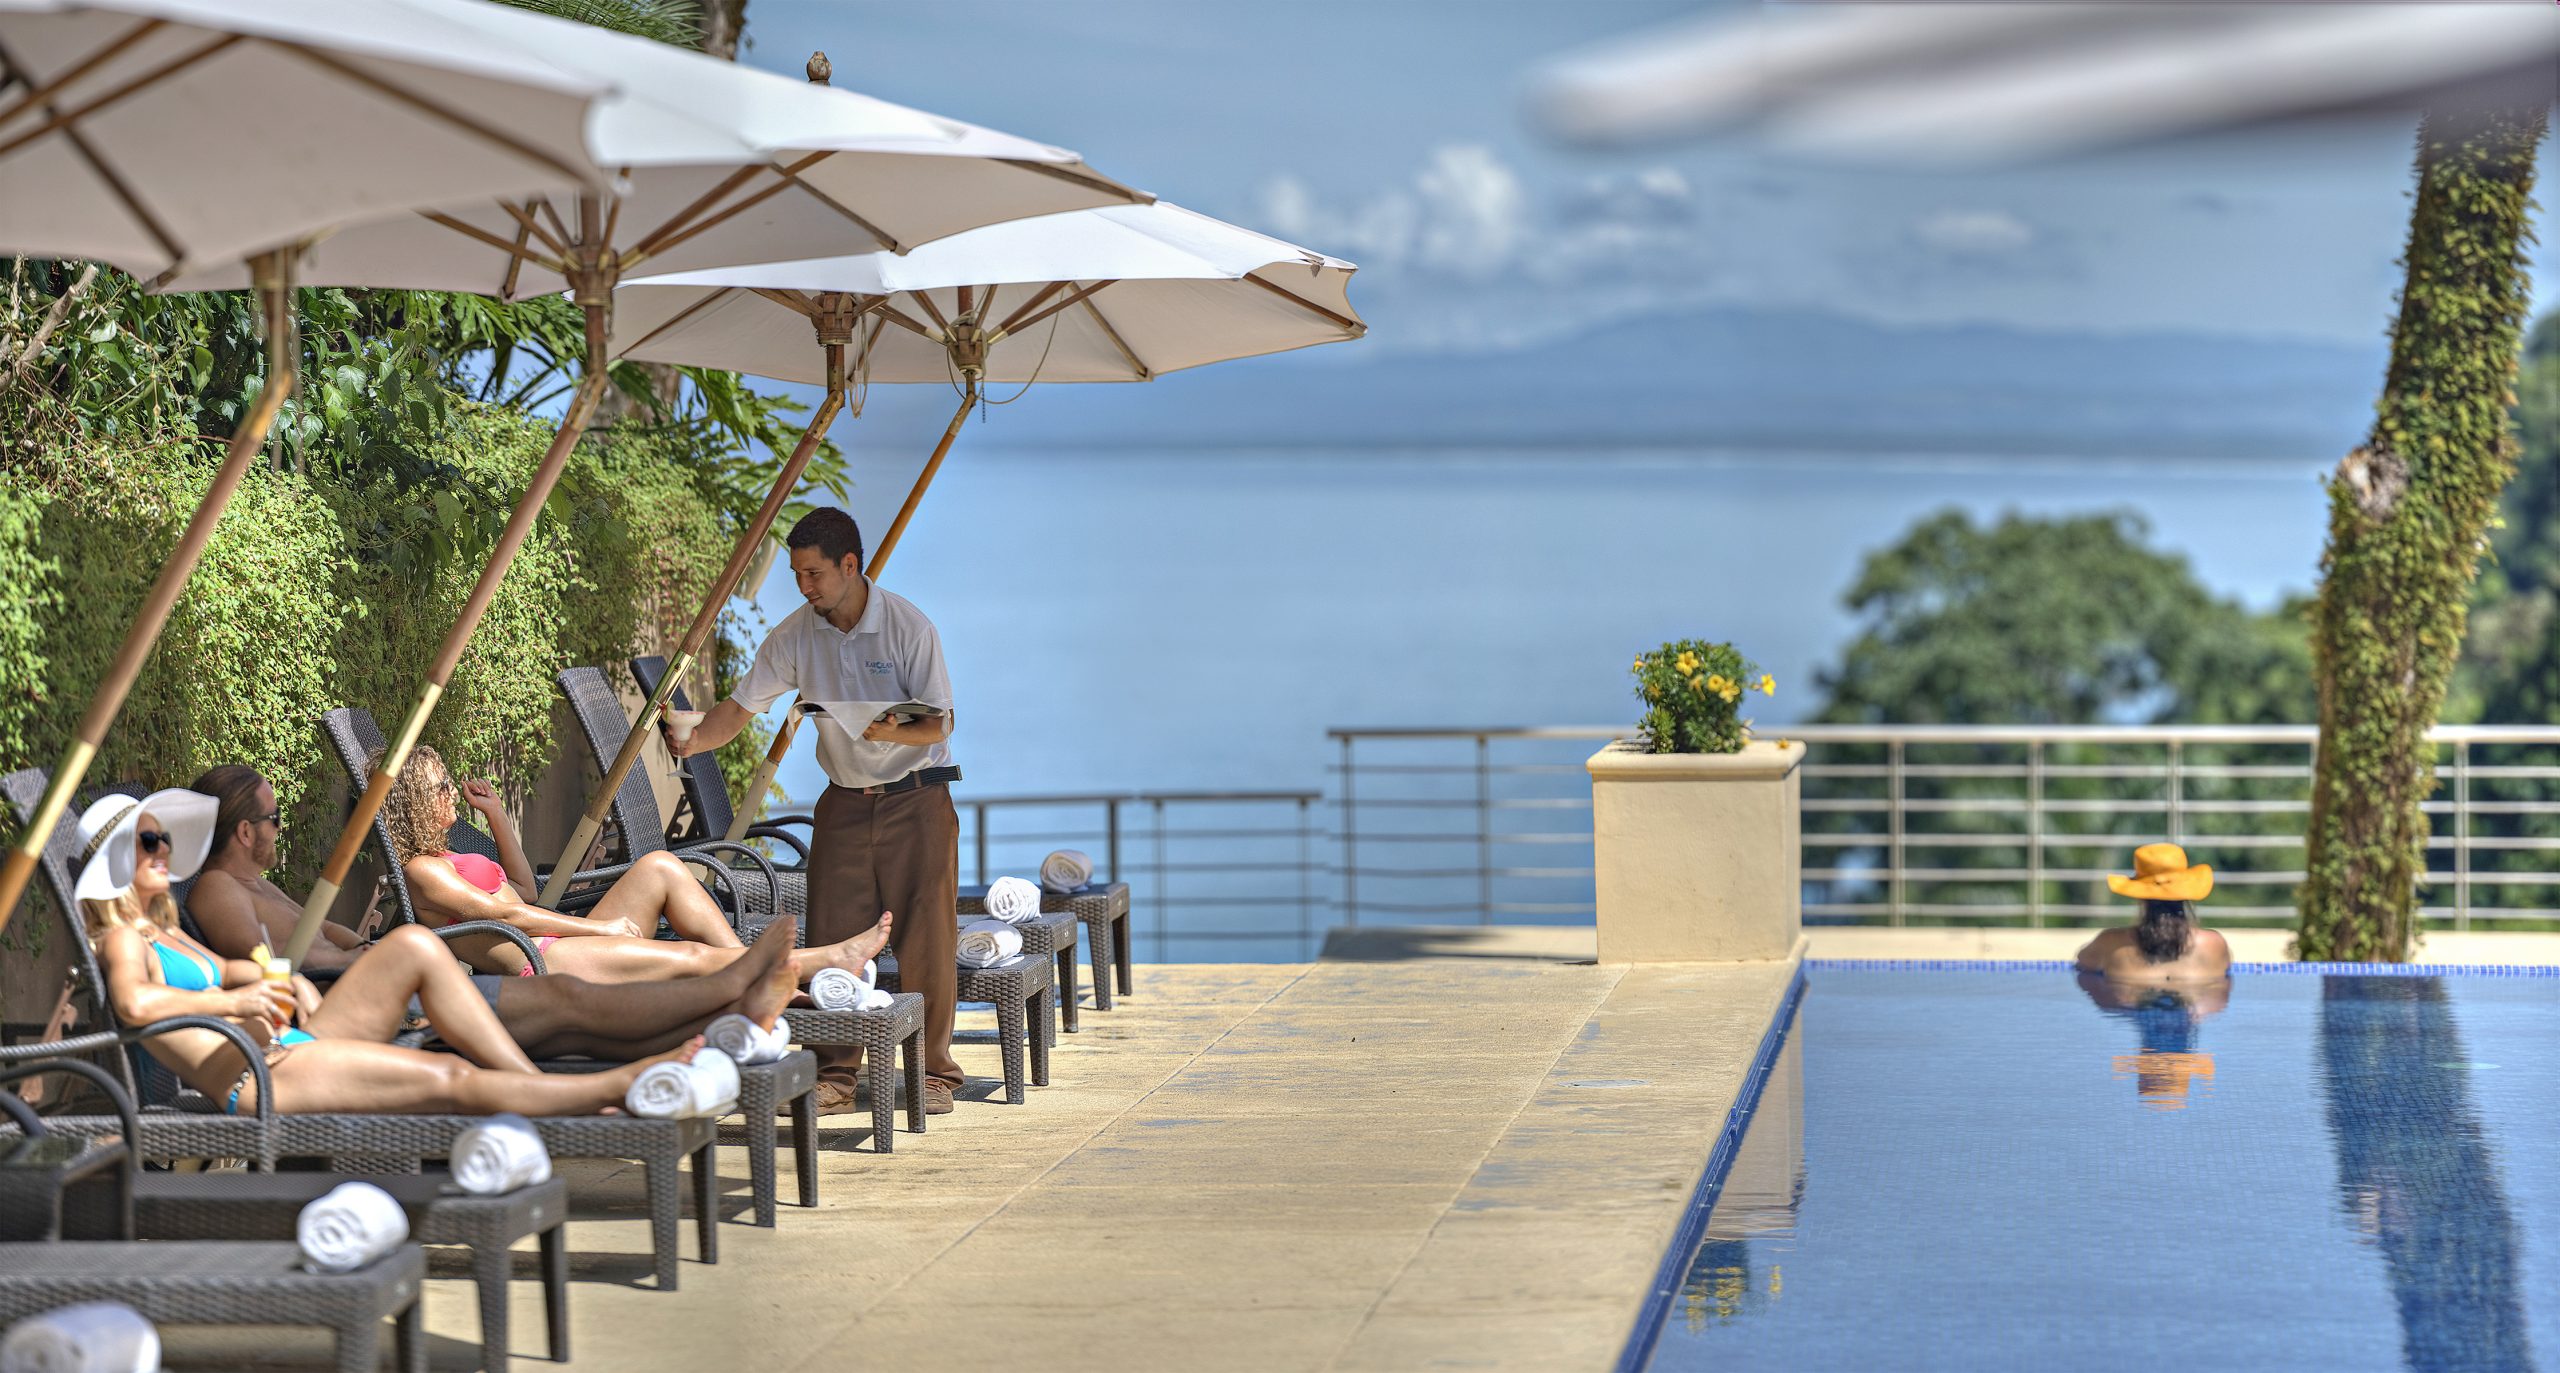 Relaxation by the infinity pool overlooking a serene lake in Costa Rica, with guests sunbathing and a server attending to their needs.